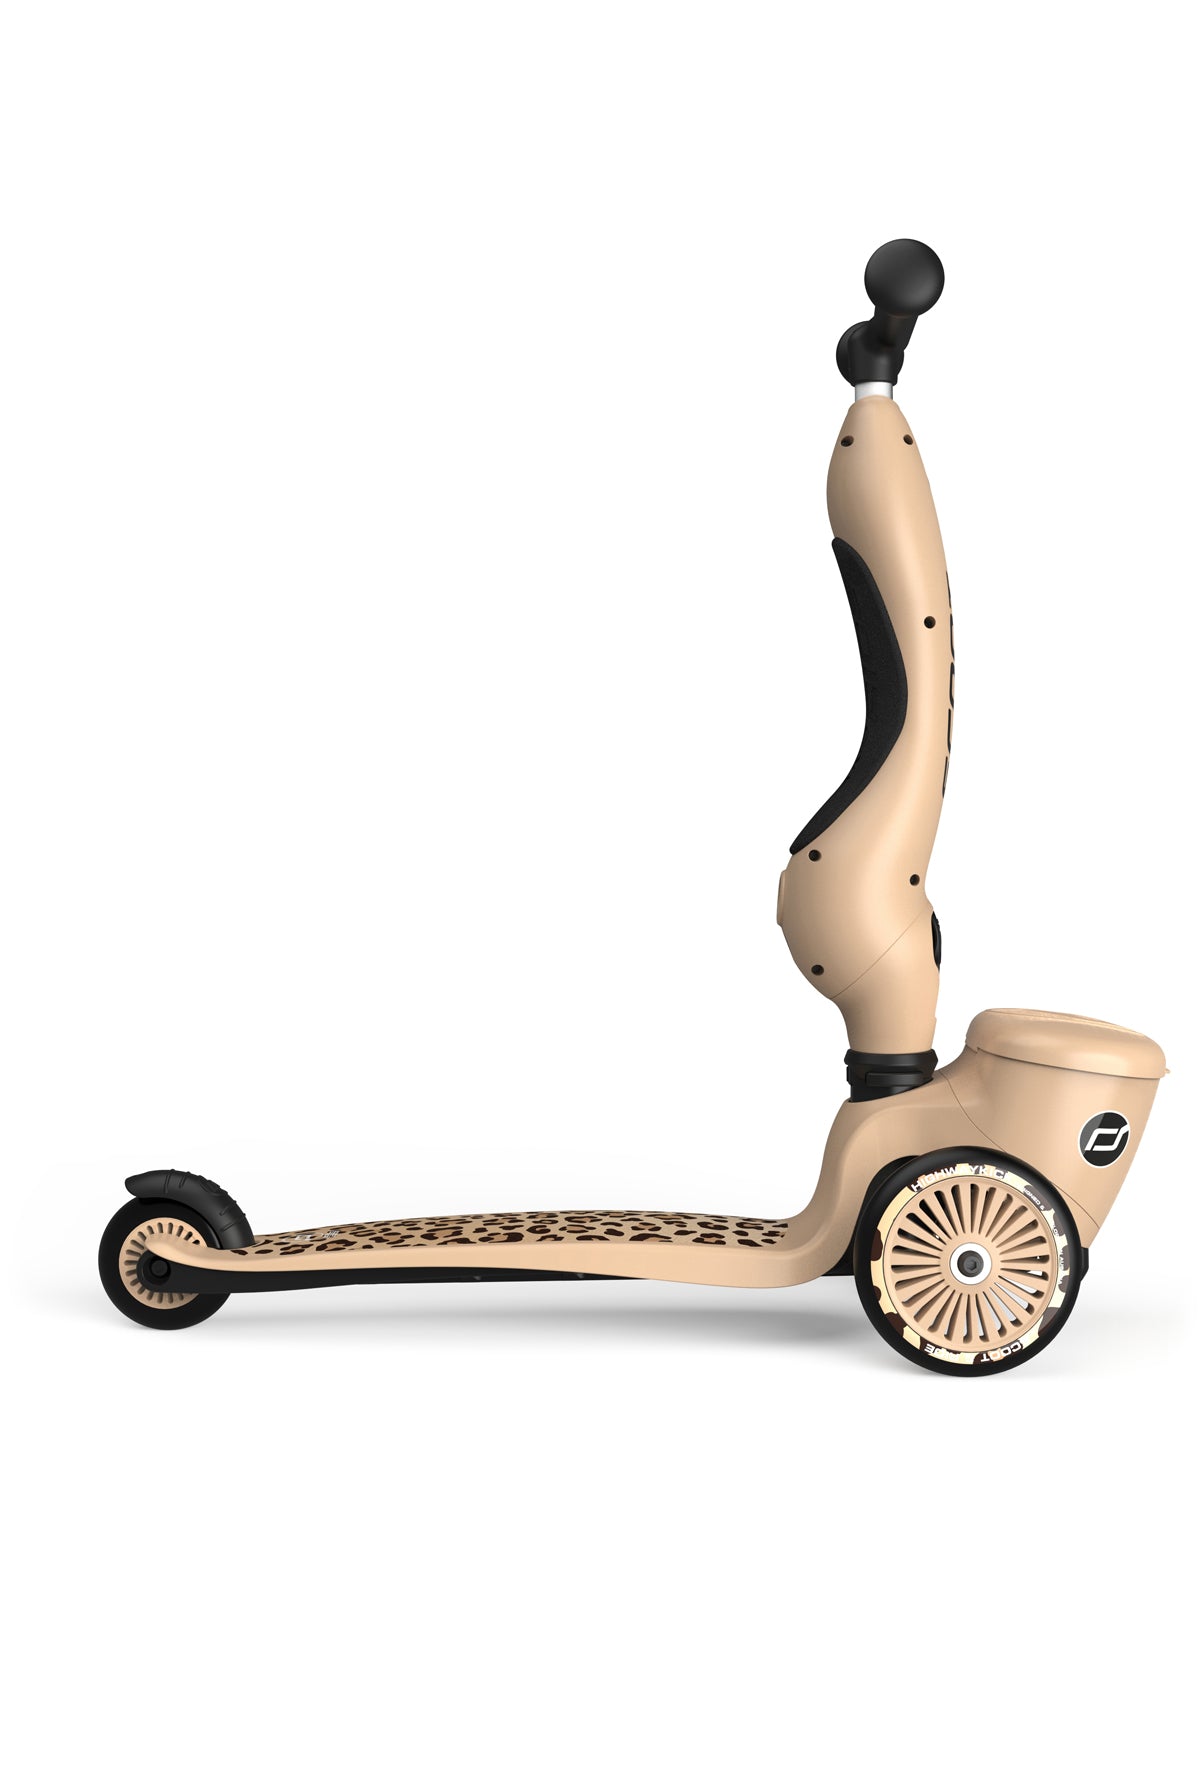 Scoot & Ride - Highwaykick 1 Lifestyle Scooter - Leopard